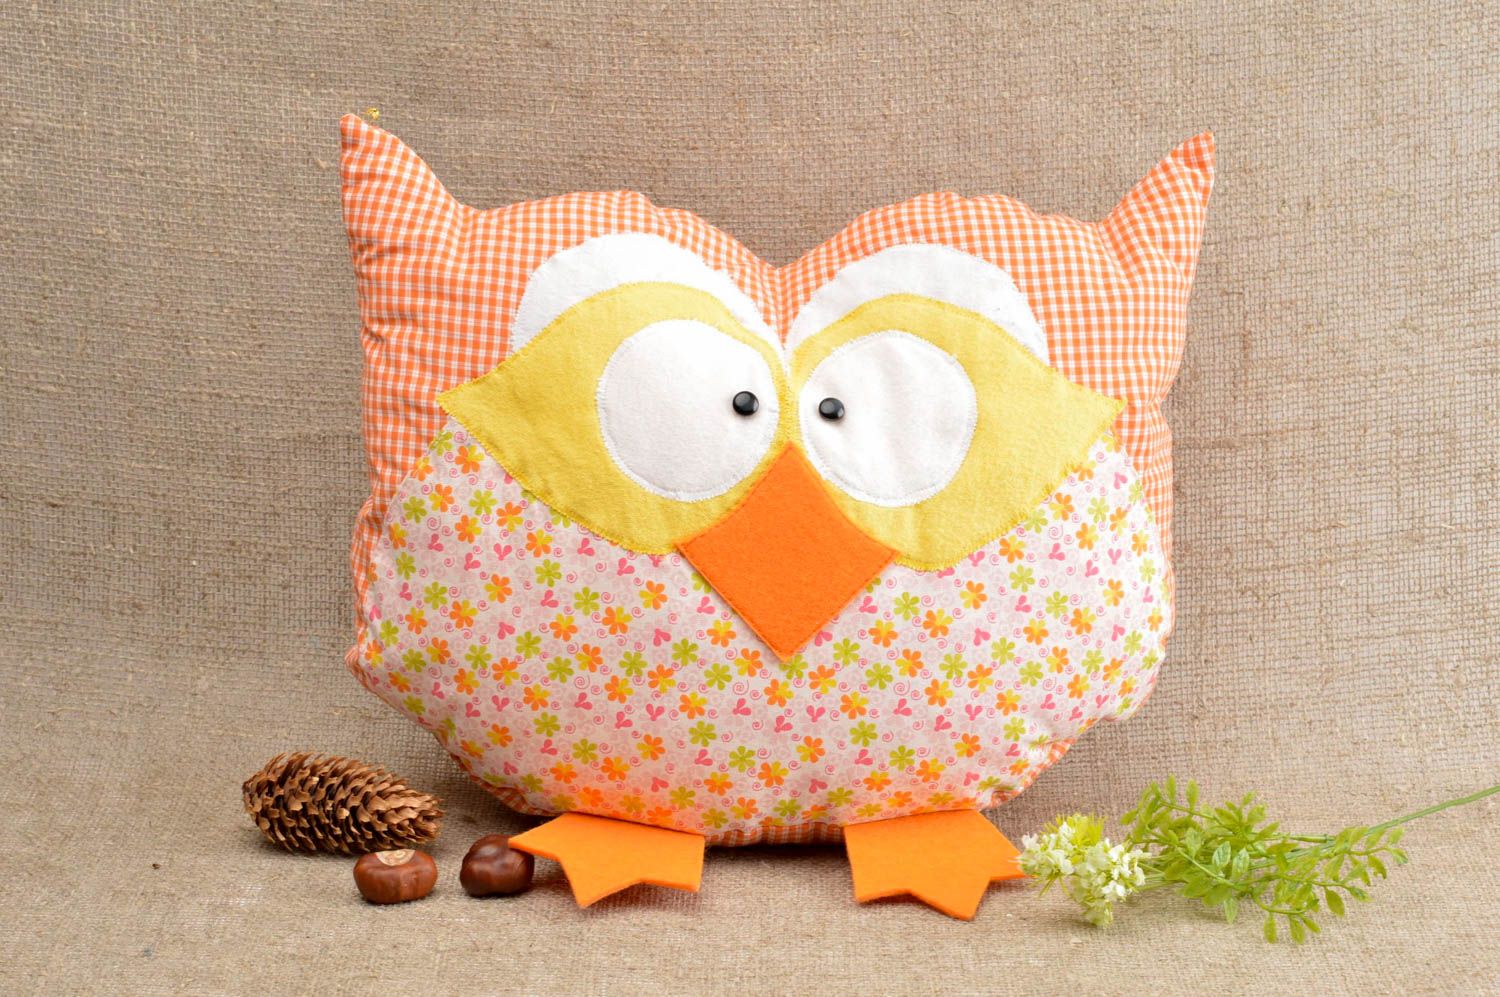 Decorative handmade stylish pillow soft lovely accessories cute home decor photo 1